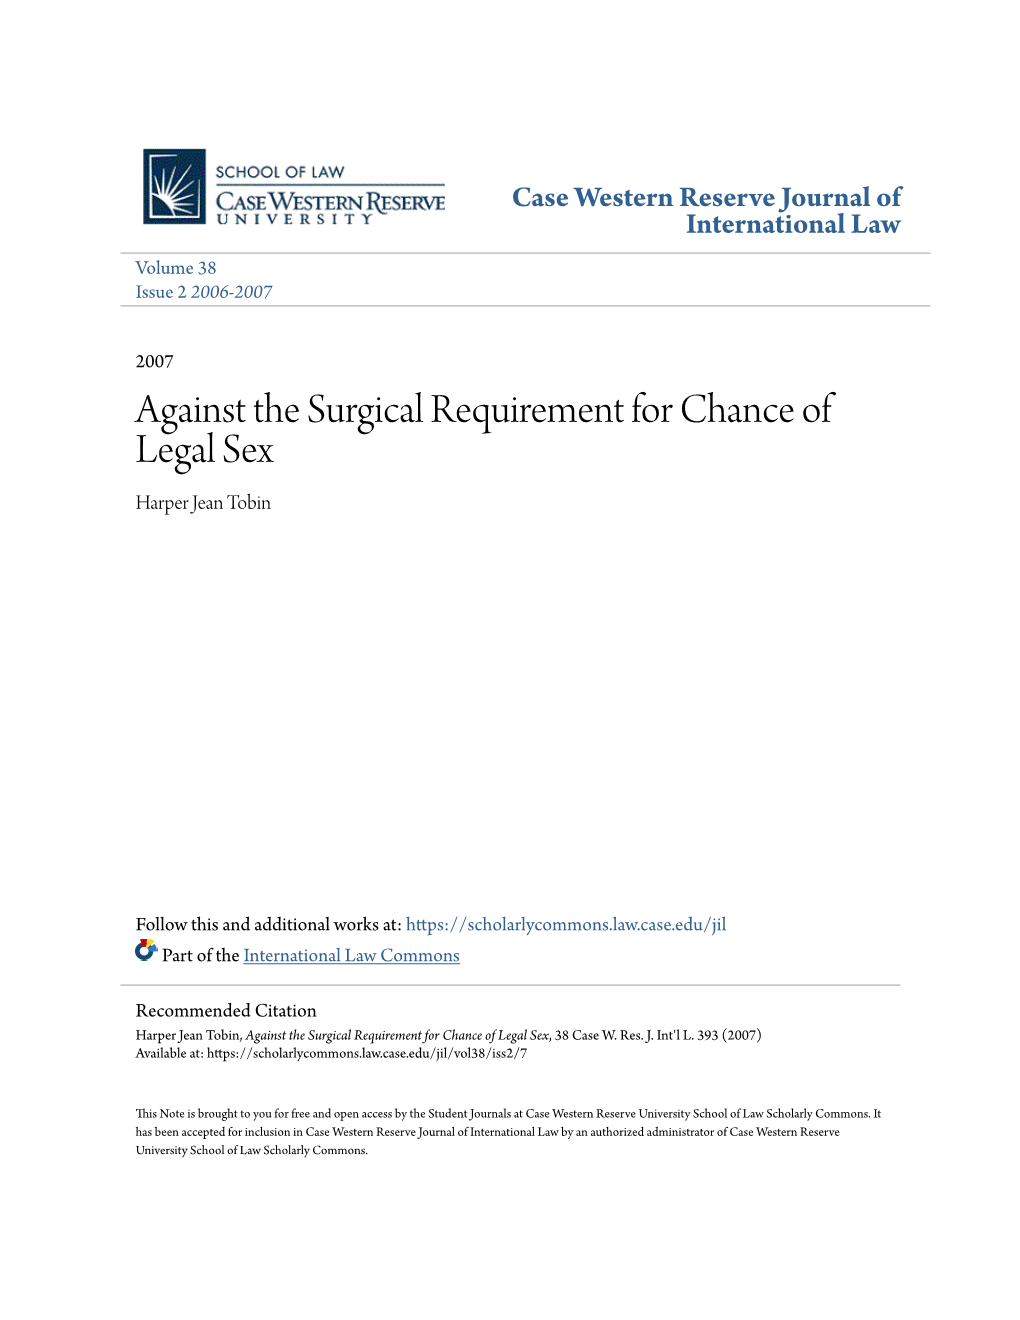 Against the Surgical Requirement for Chance of Legal Sex Harper Jean Tobin